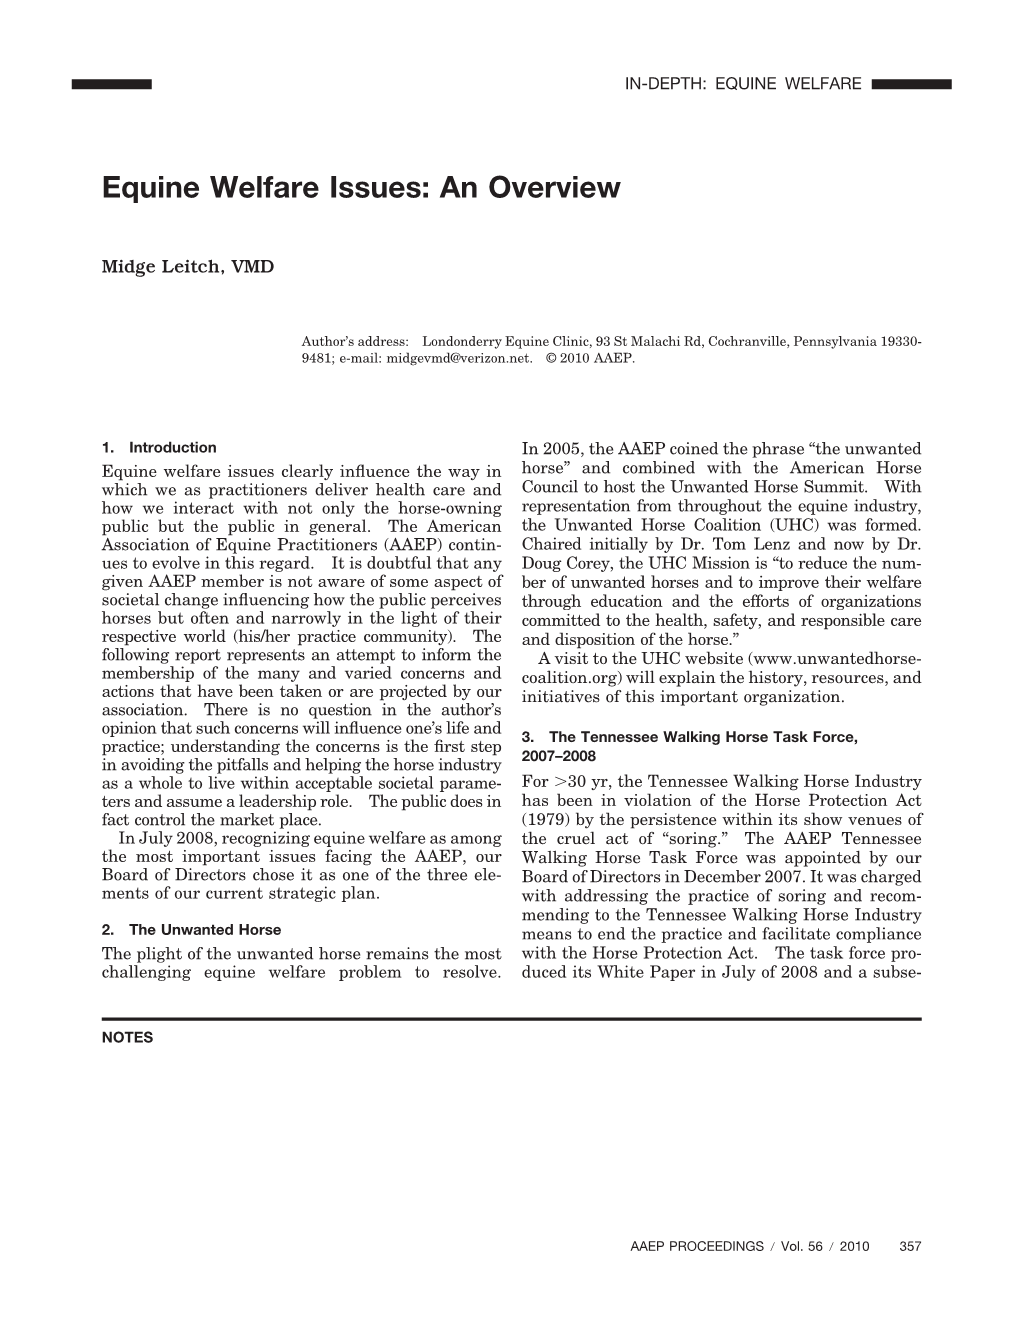 Equine Welfare Issues: an Overview